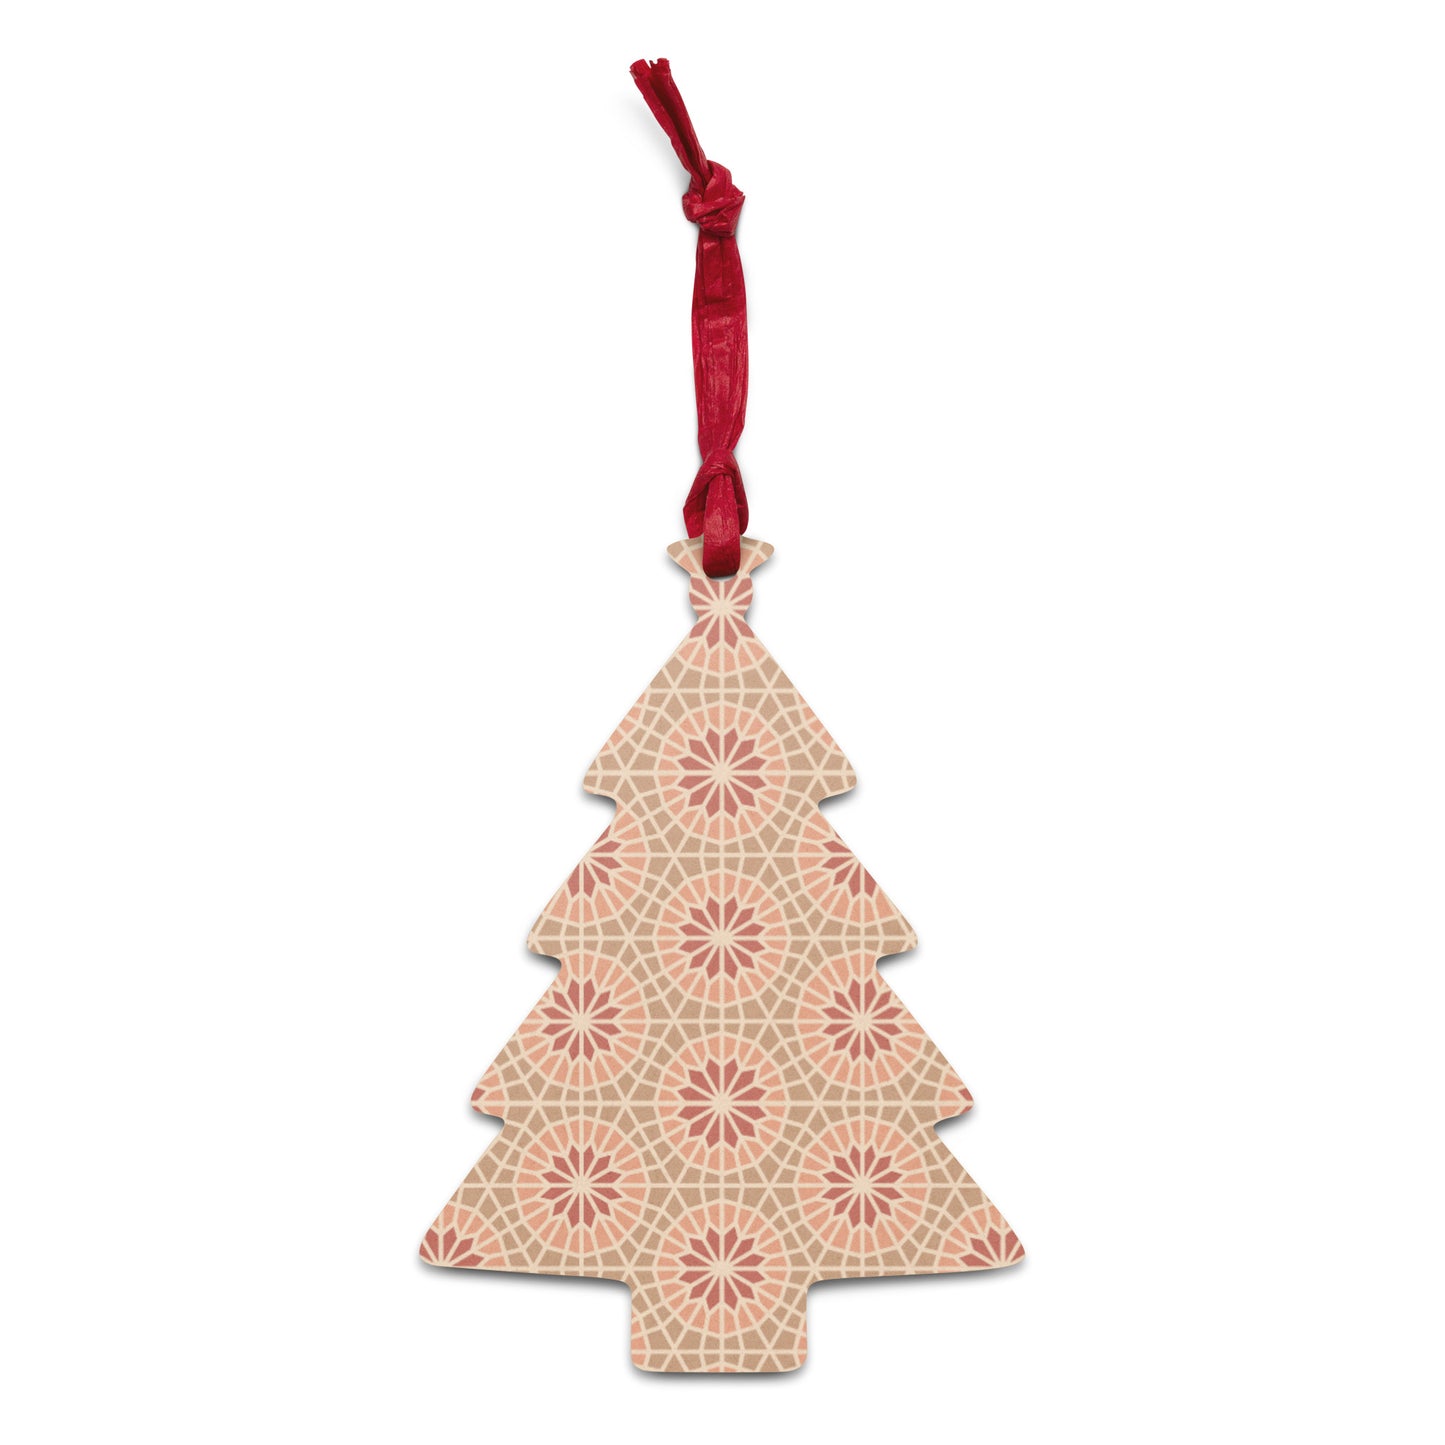 Wooden Holiday Ornaments - Geometric Star in Cocoa and Cream